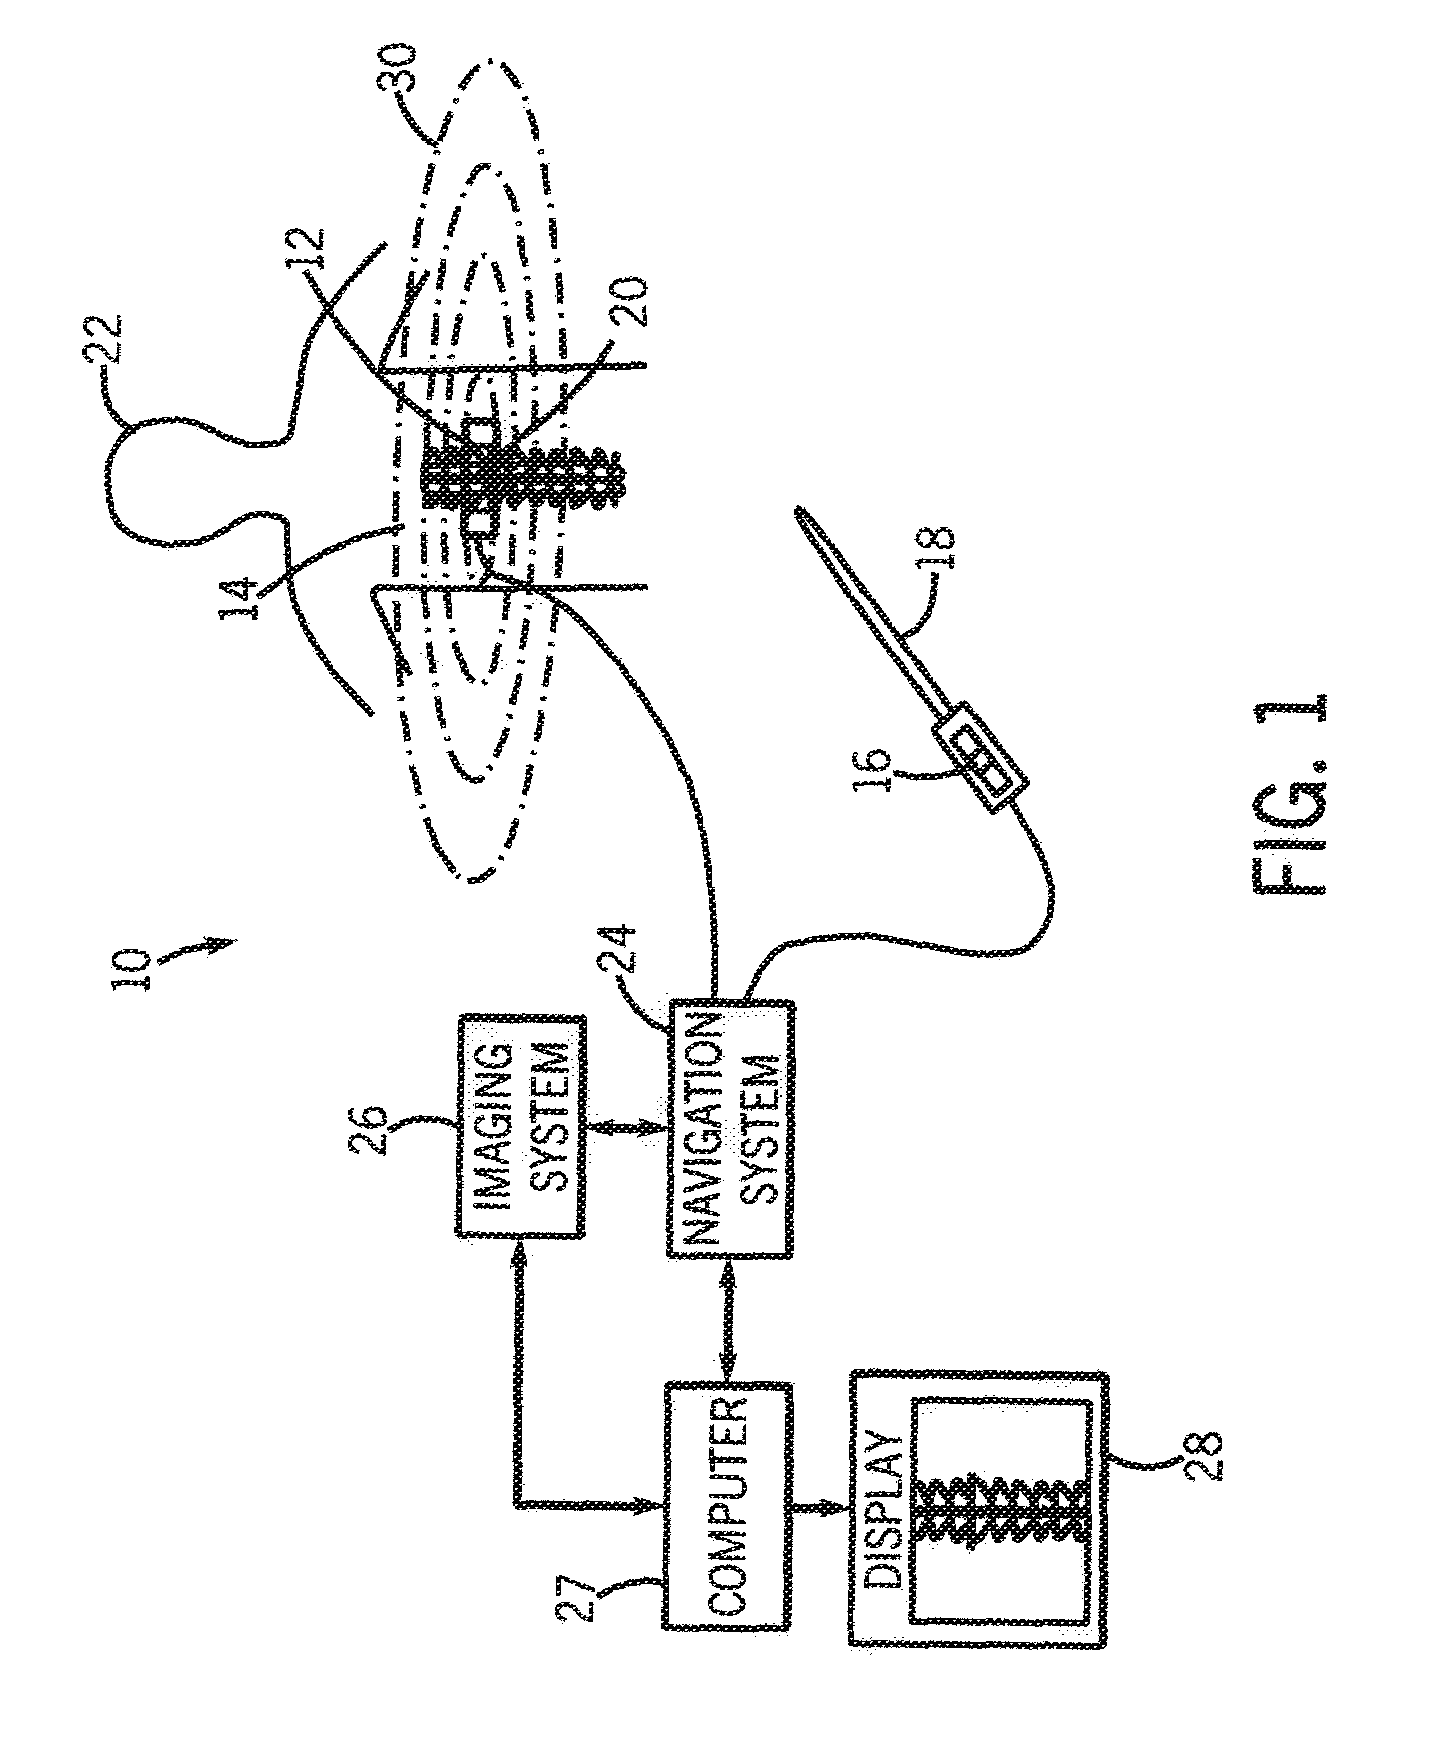 System and method for surgical navigation of motion preservation prosthesis